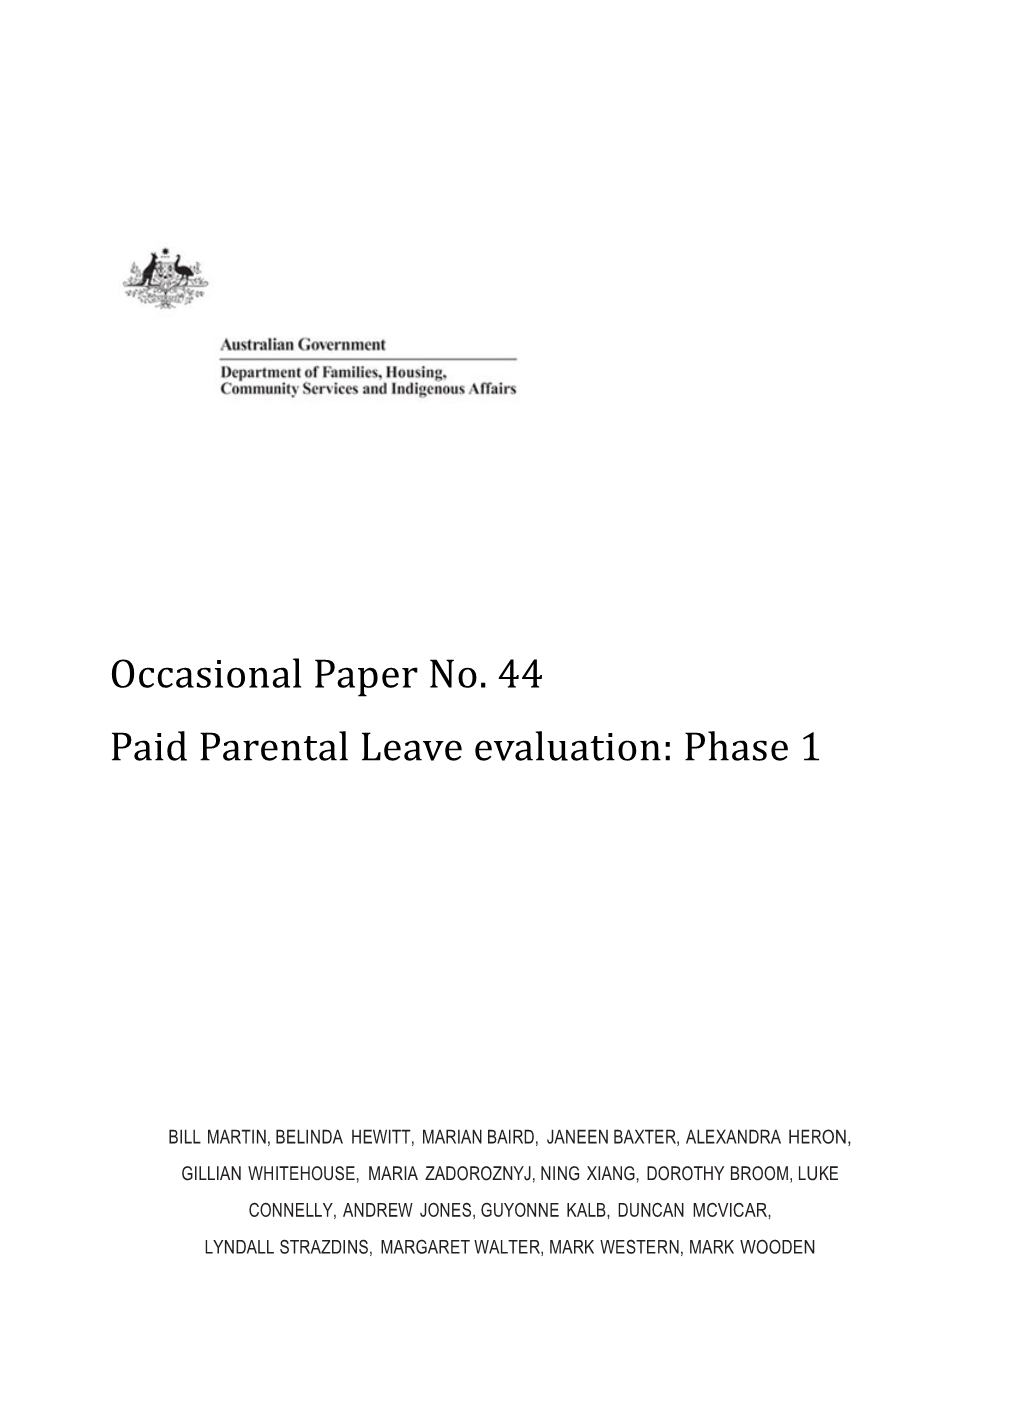 Occasional Paper Number 44